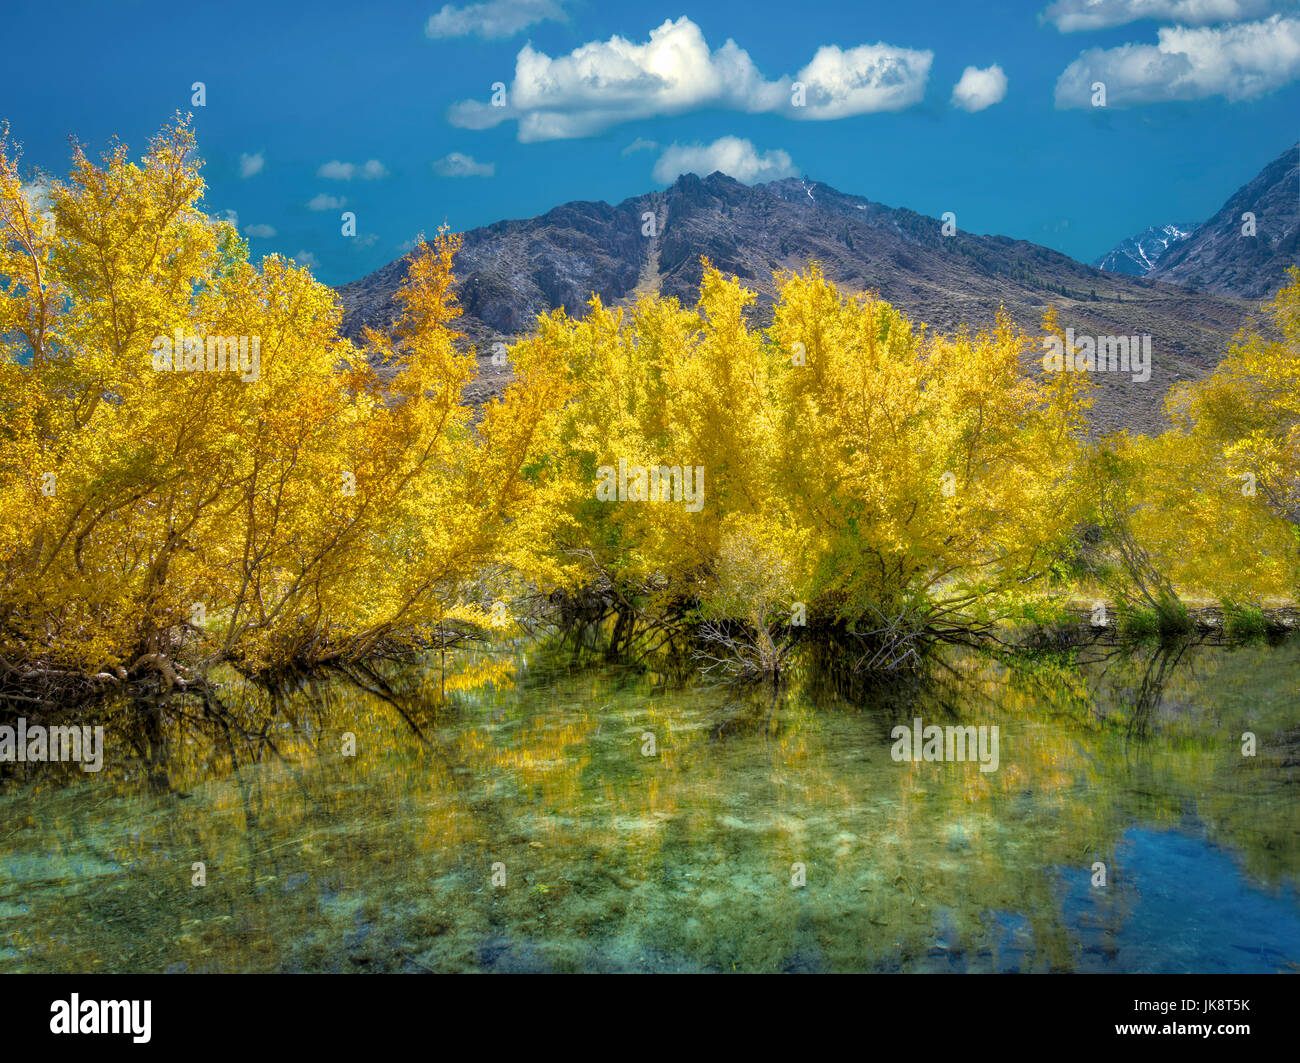 Small beaver pond on McGee Creek with fall color. Eastern Sirra Nevada mountains, California Stock Photo